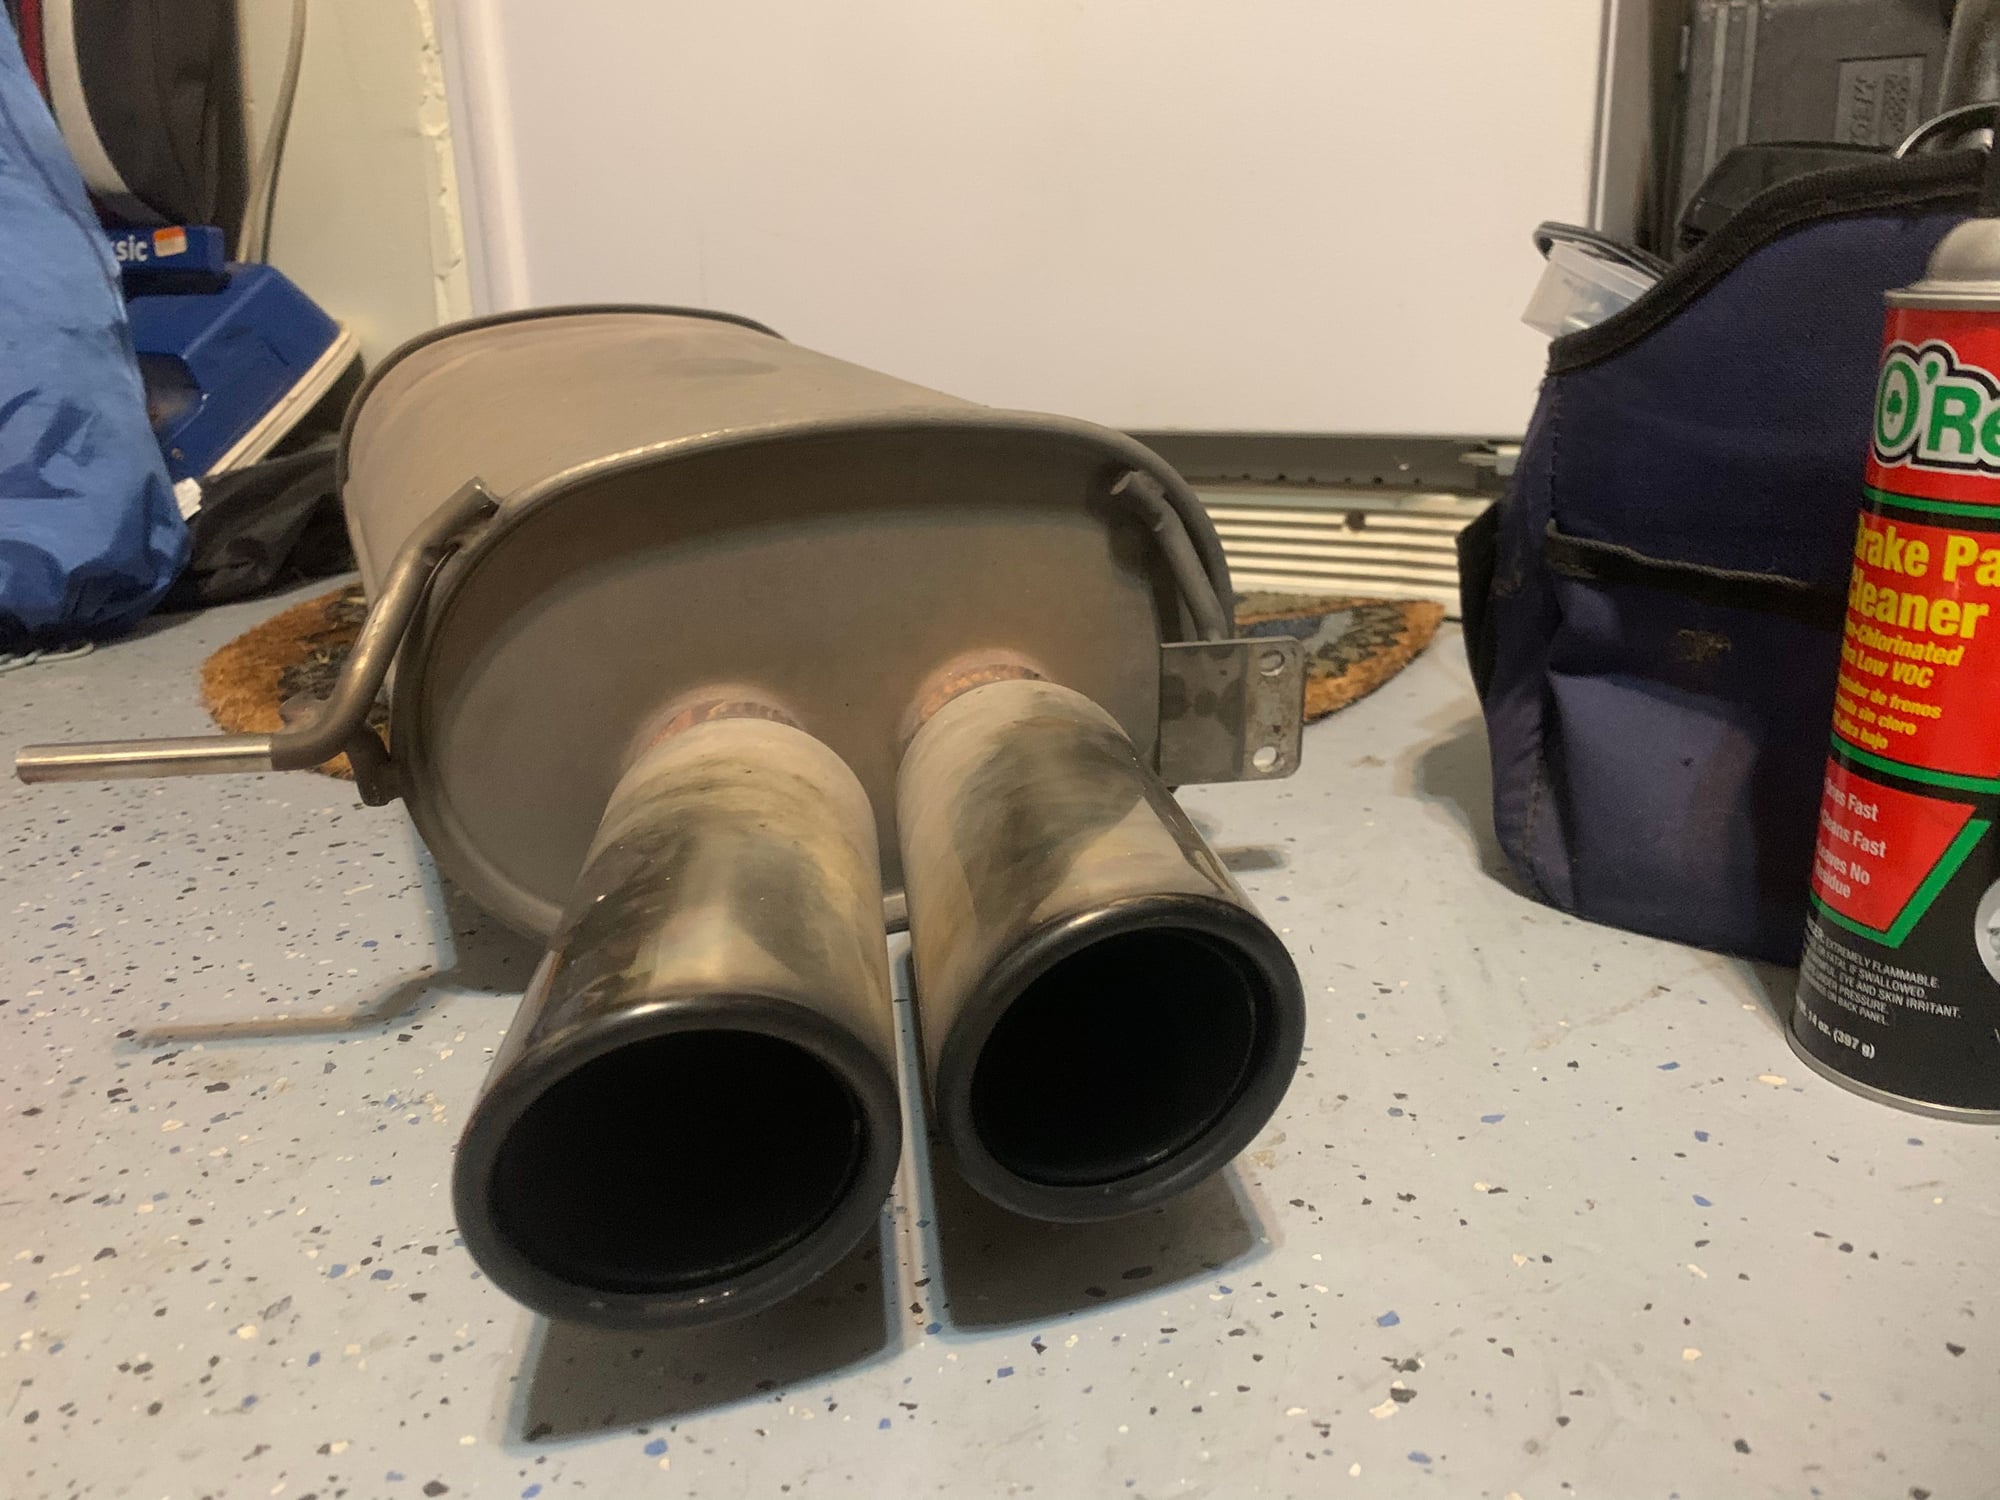 Engine - Exhaust - Racing Beat Catback Exhaust(Old school) for sale or trade(preferably) - Used - 1993 to 1995 Mazda RX-7 - Fairfield, CA 94534, United States